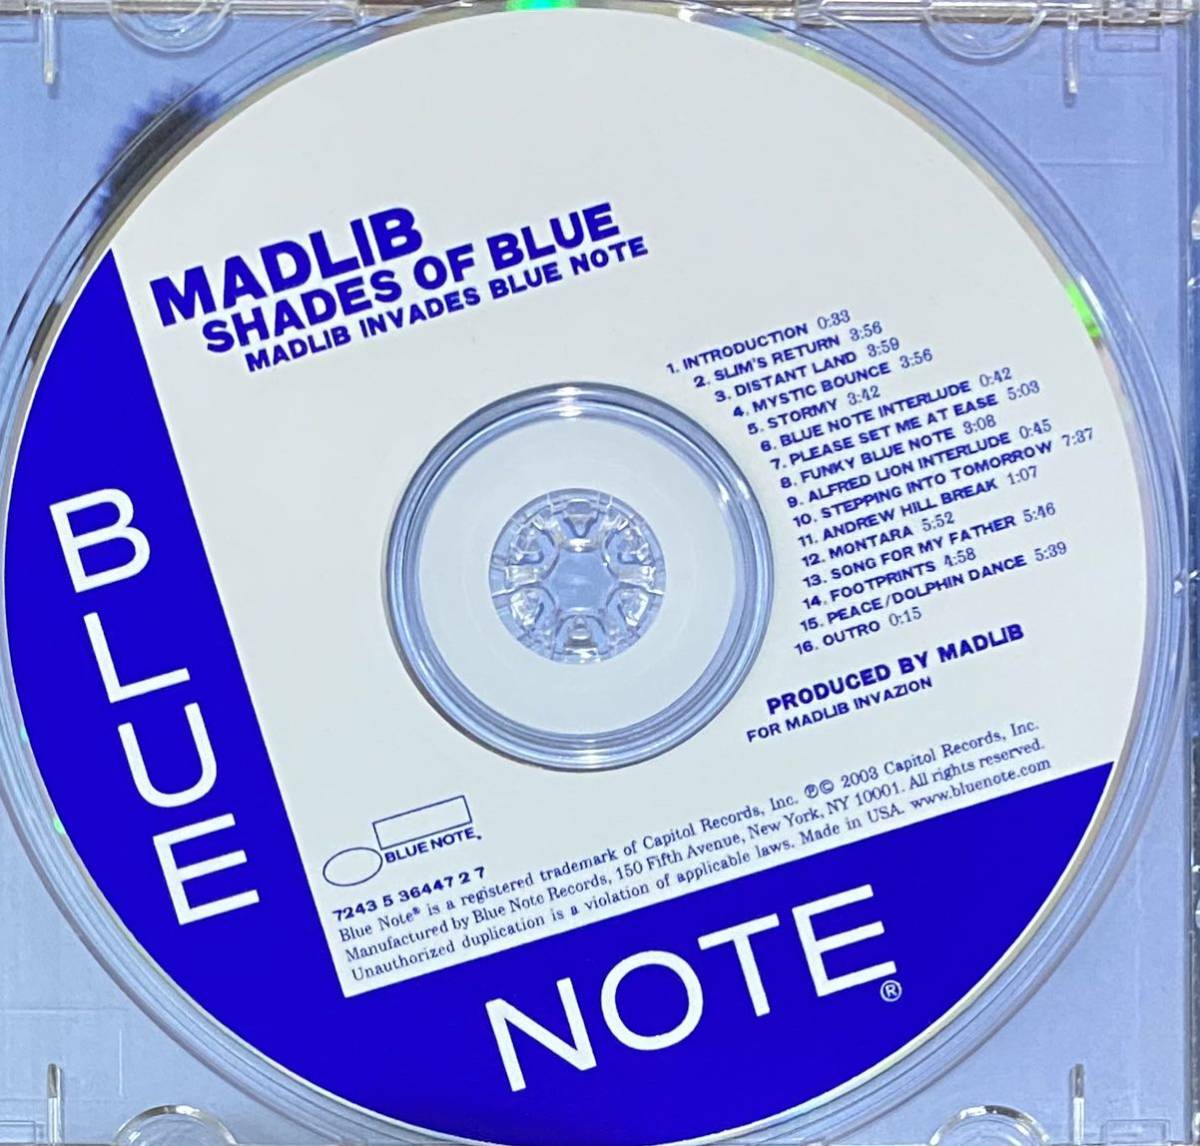 CD 2枚セット】Shades of Blue■Untinted (sources for Madlib's Shades of Blue■Madlib マッドリブ■BLUE NOTE リミックス■MADVILLAIN 